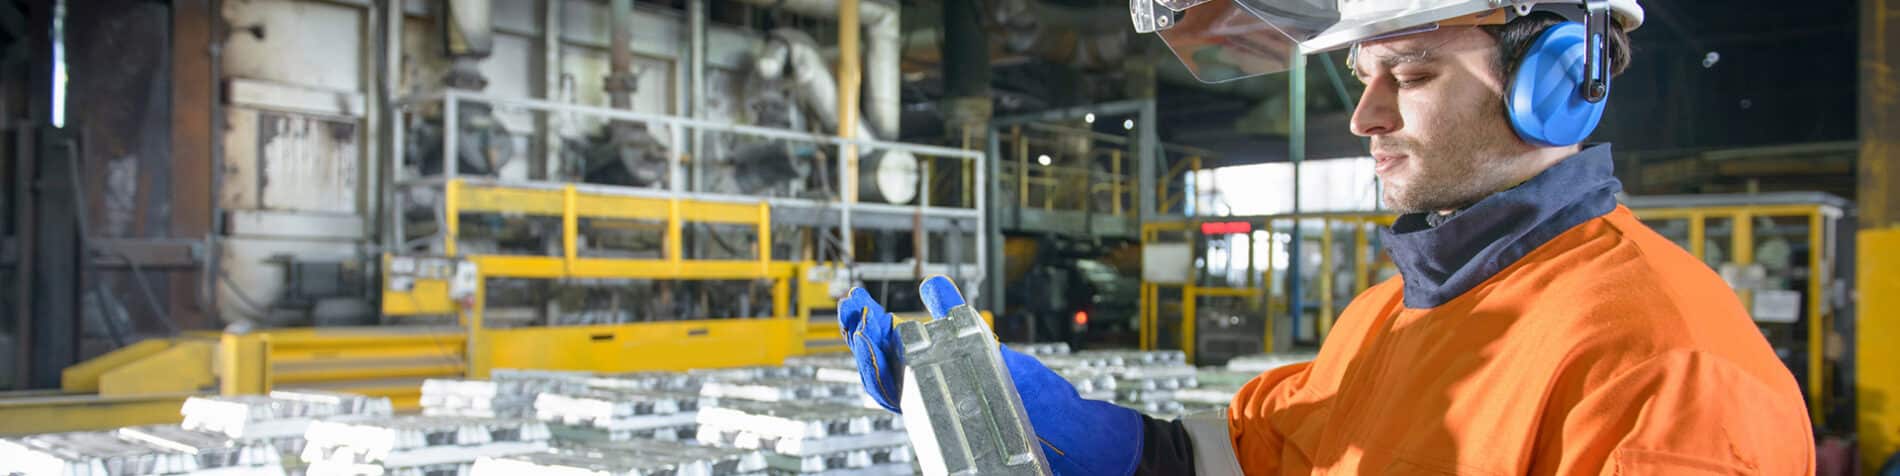 Aluminum Company Vedanta Pulled Off One of the Largest Business Transformations in the Metals Industry